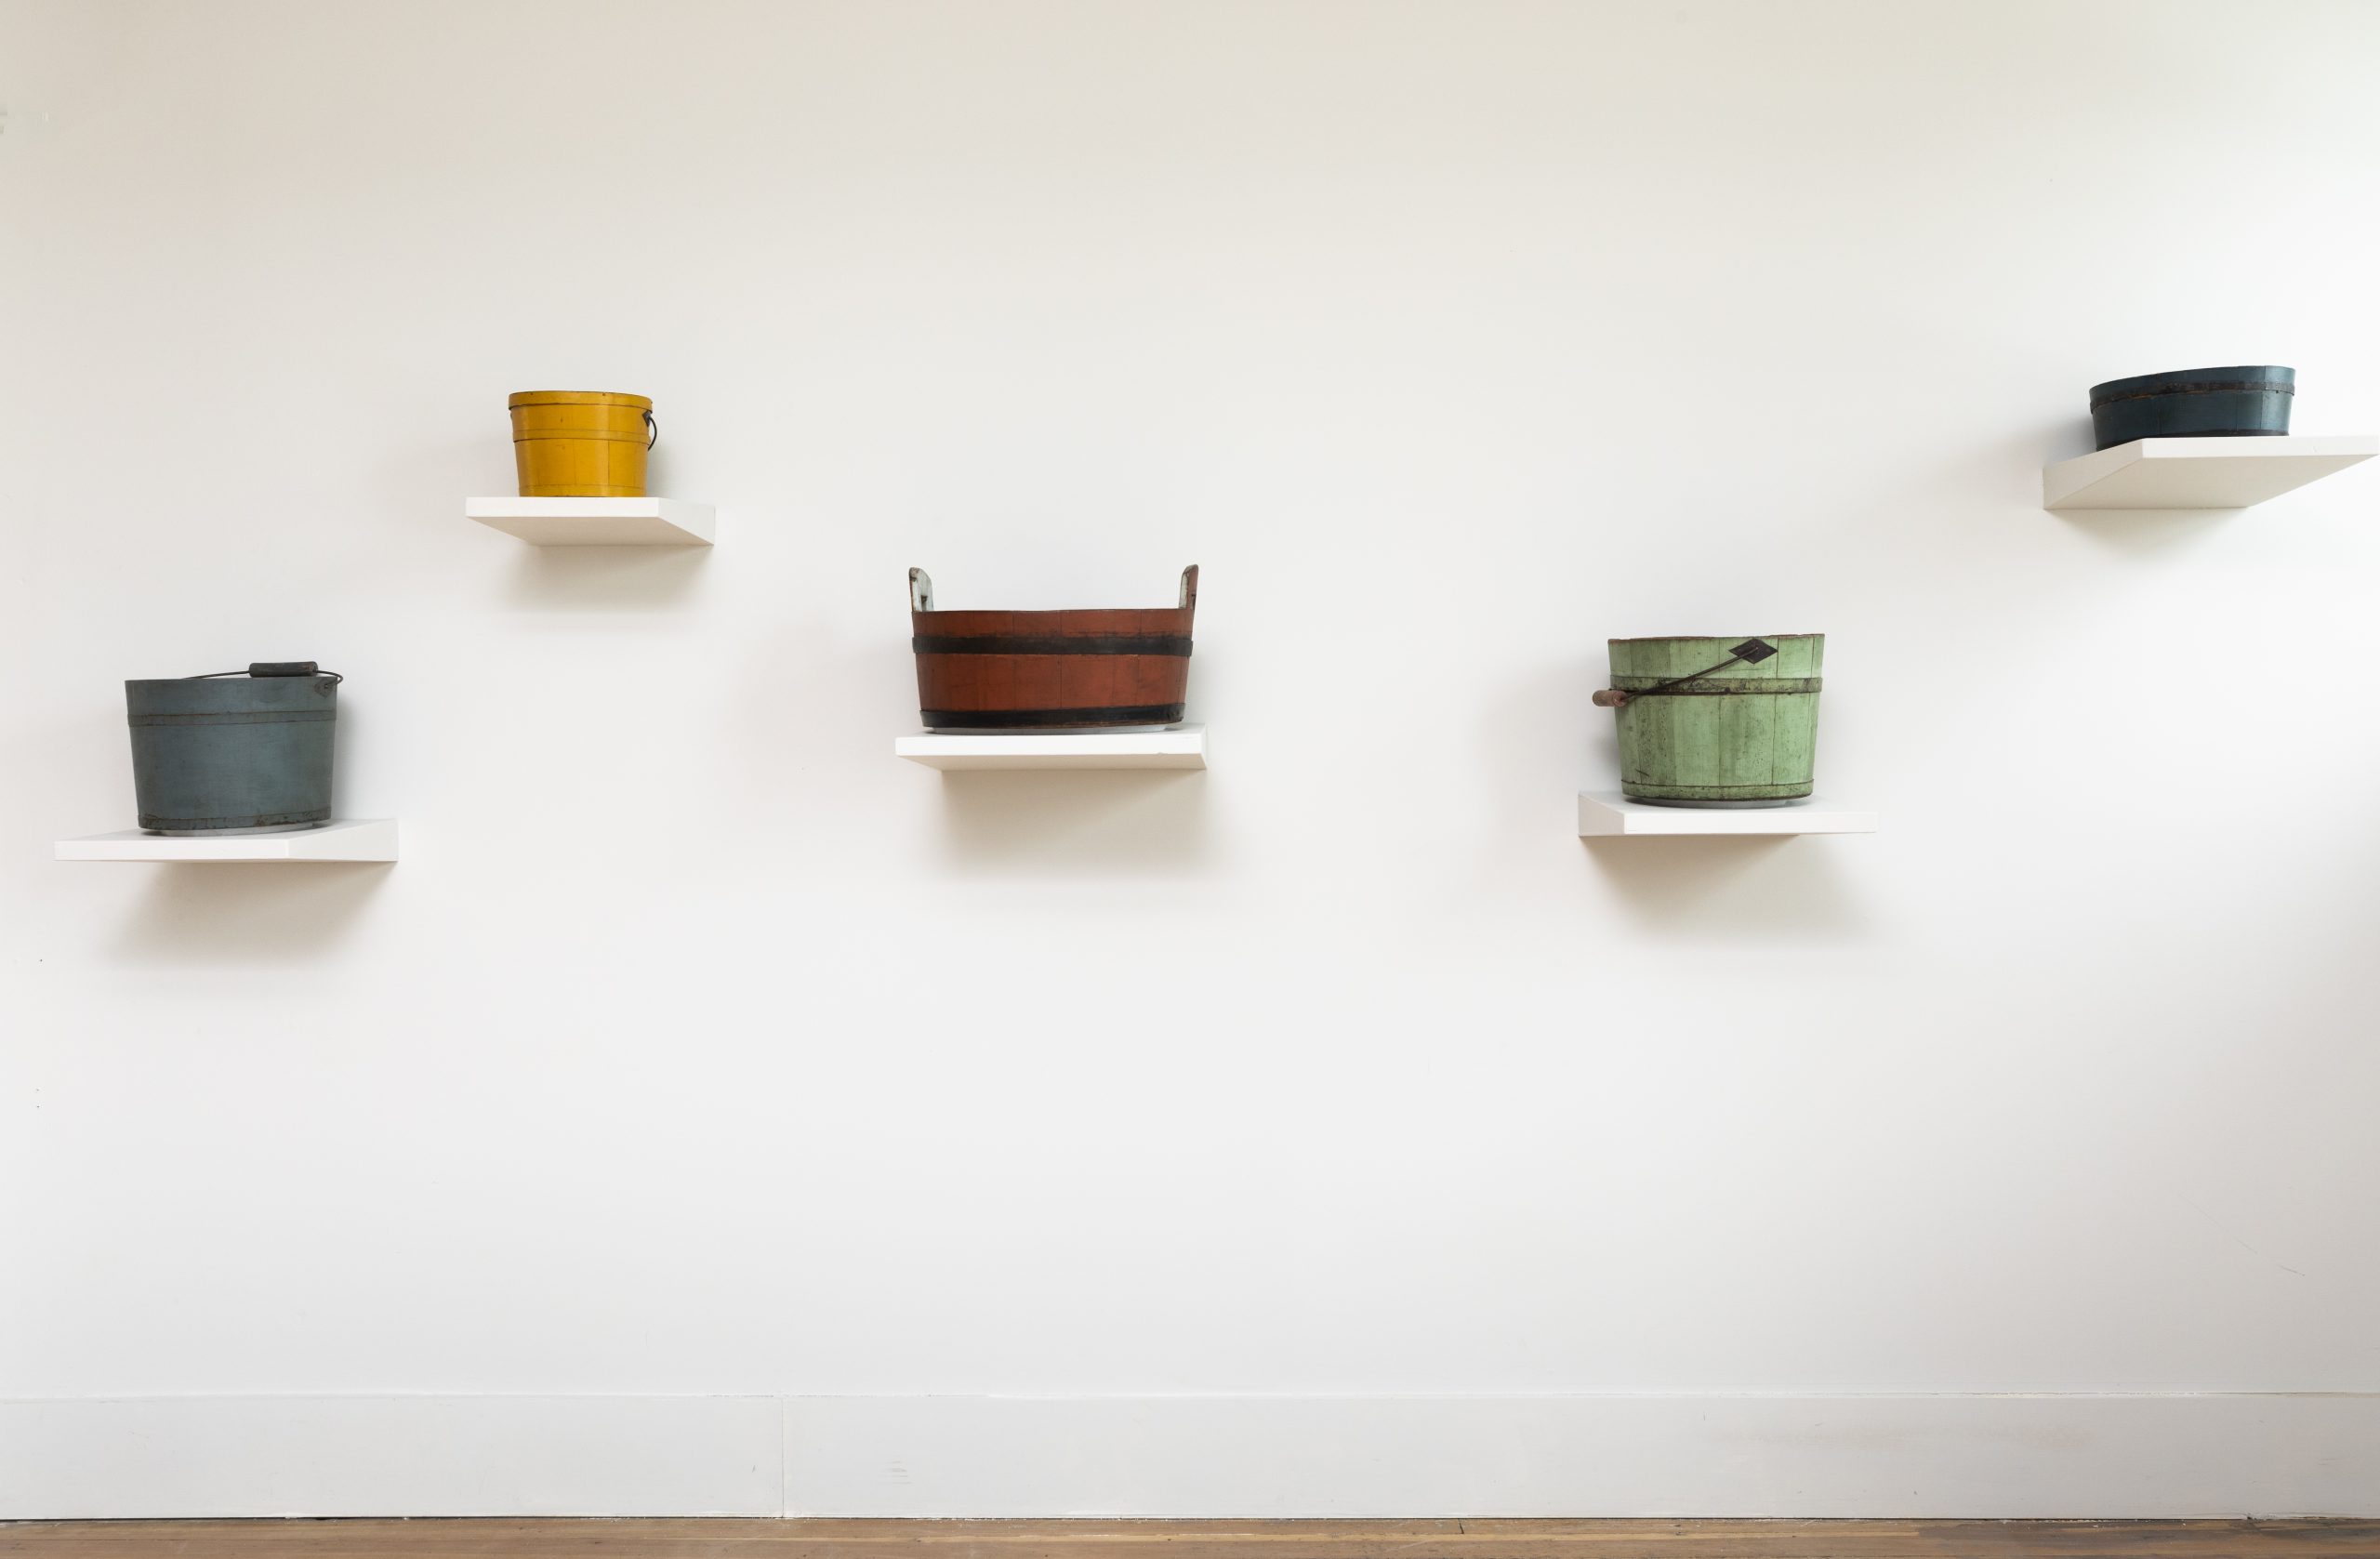 Five colored pots on white shelves against a white wall.